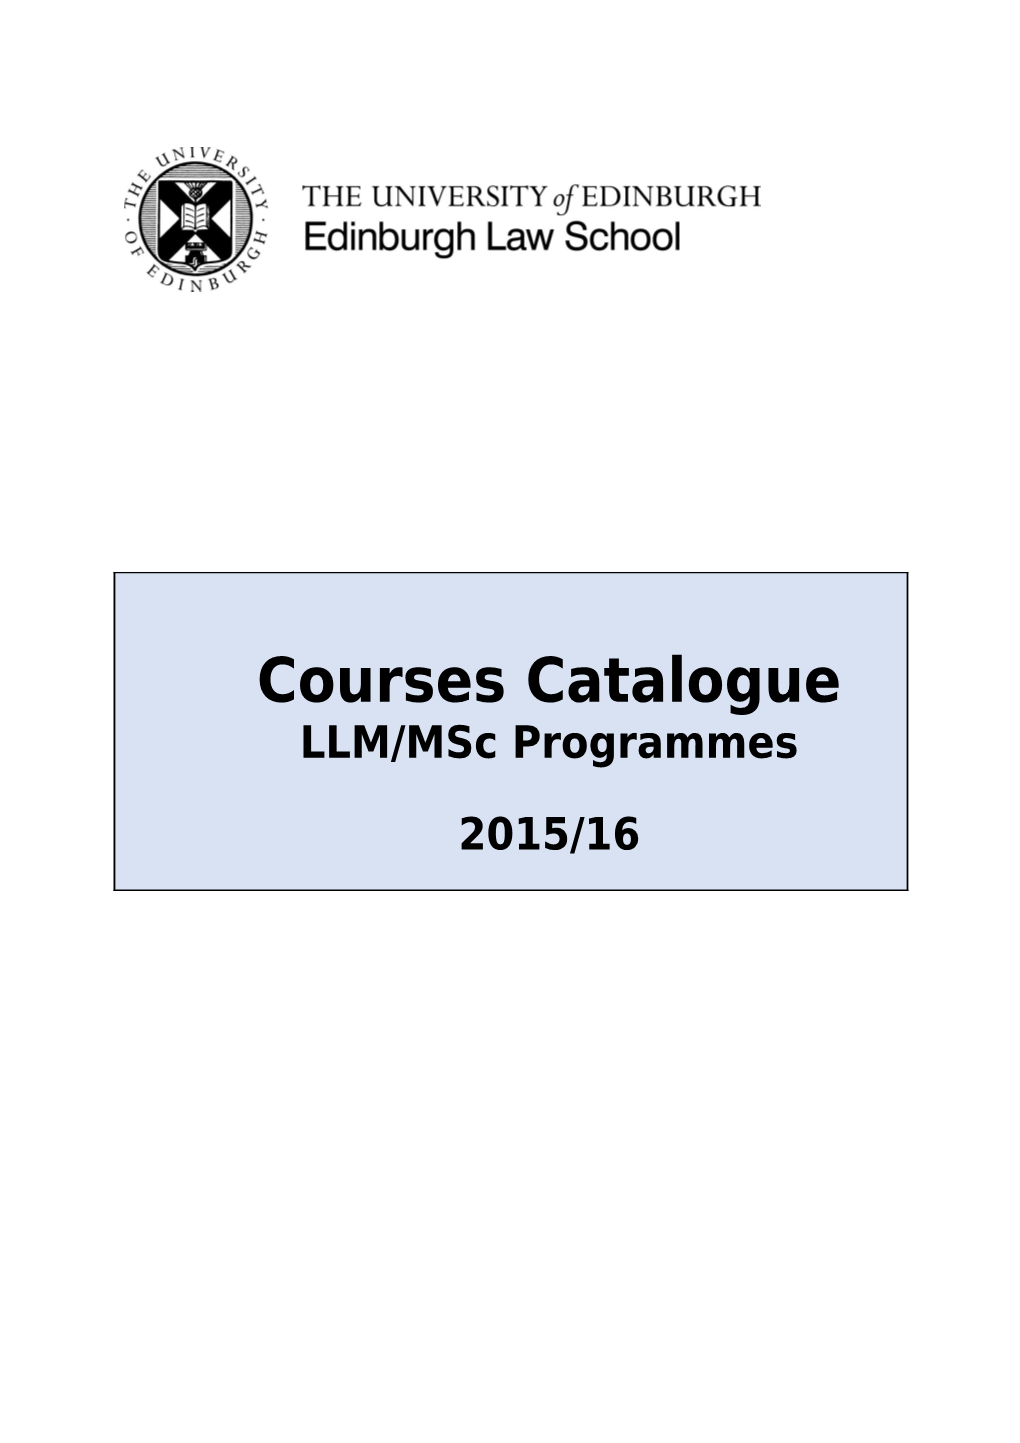 In This Catalogue, You Will Find Details of All the Courses Which We Intend to Offer At